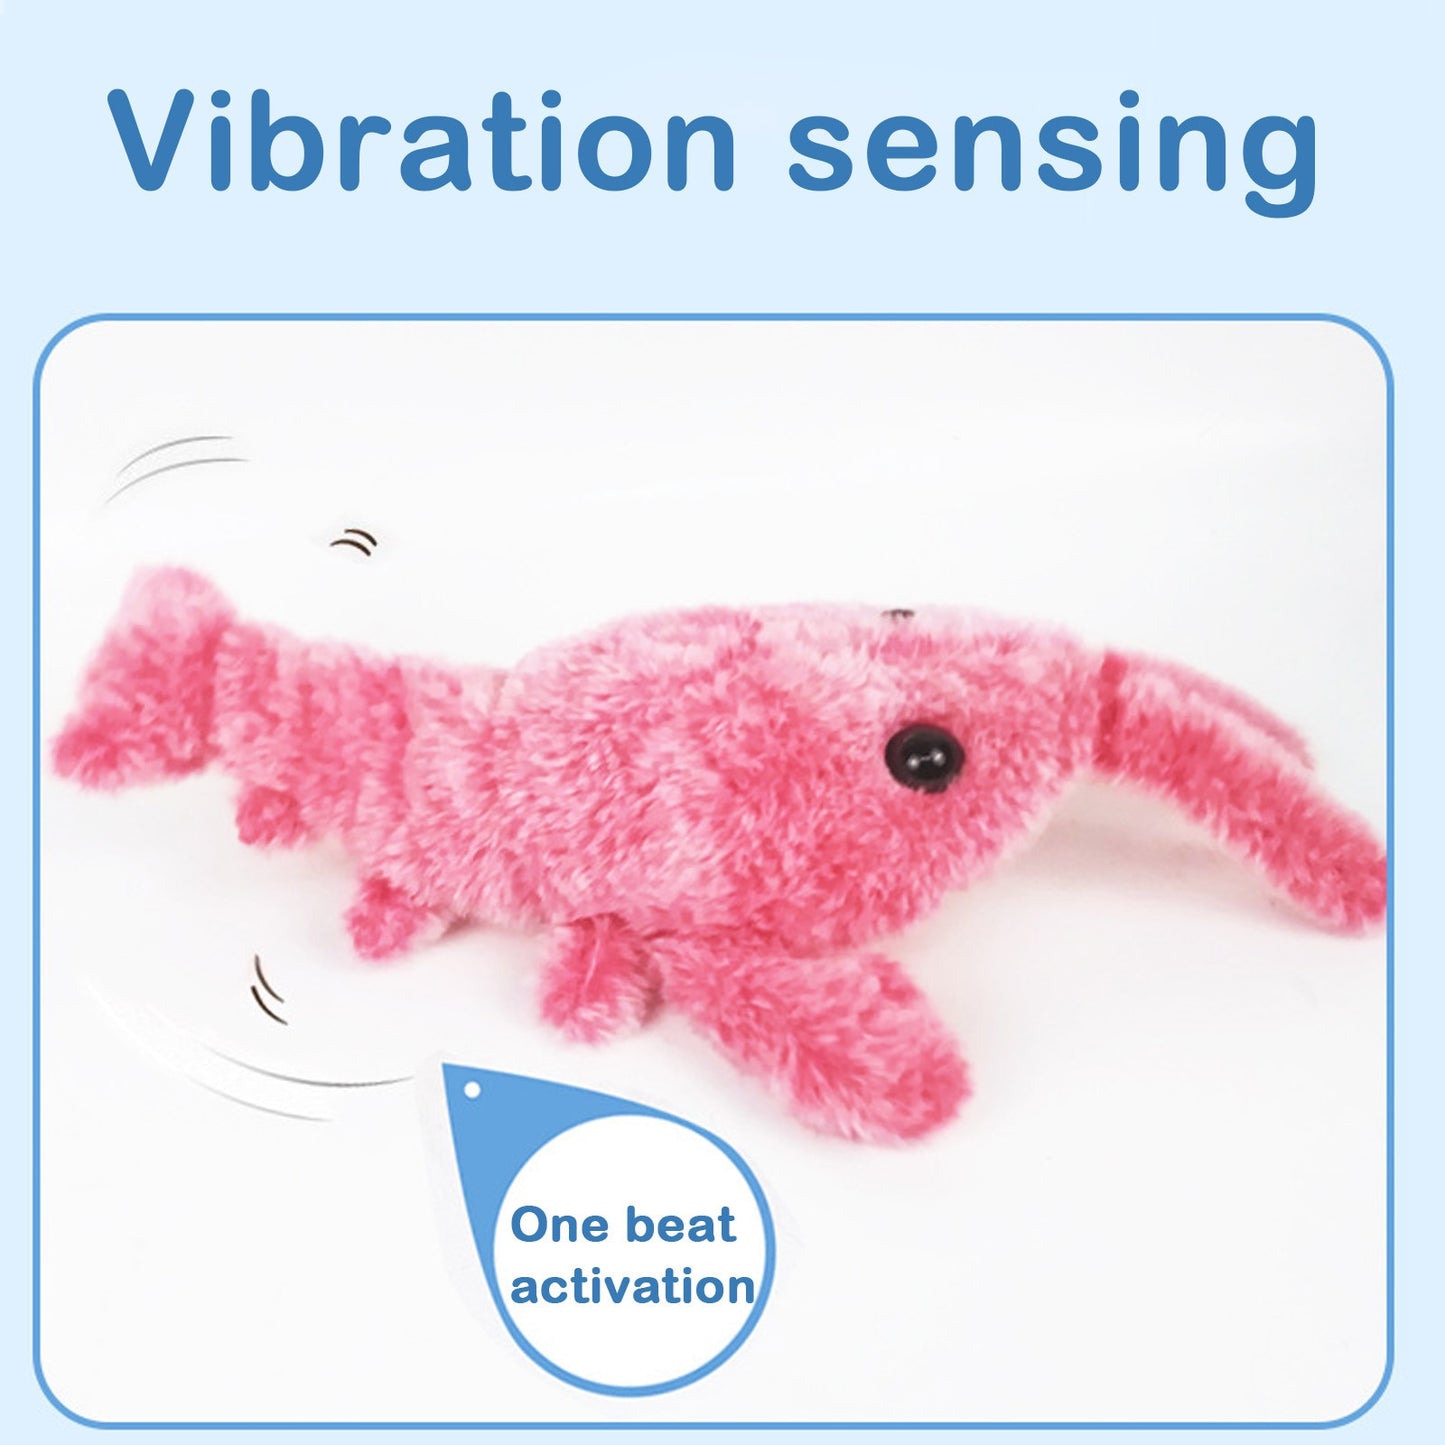 Electric Jumping Cat toy Shrimp Moving Simulation Lobster Electronic Plush Toys For Pet dog cat Children Stuffed Animal toy